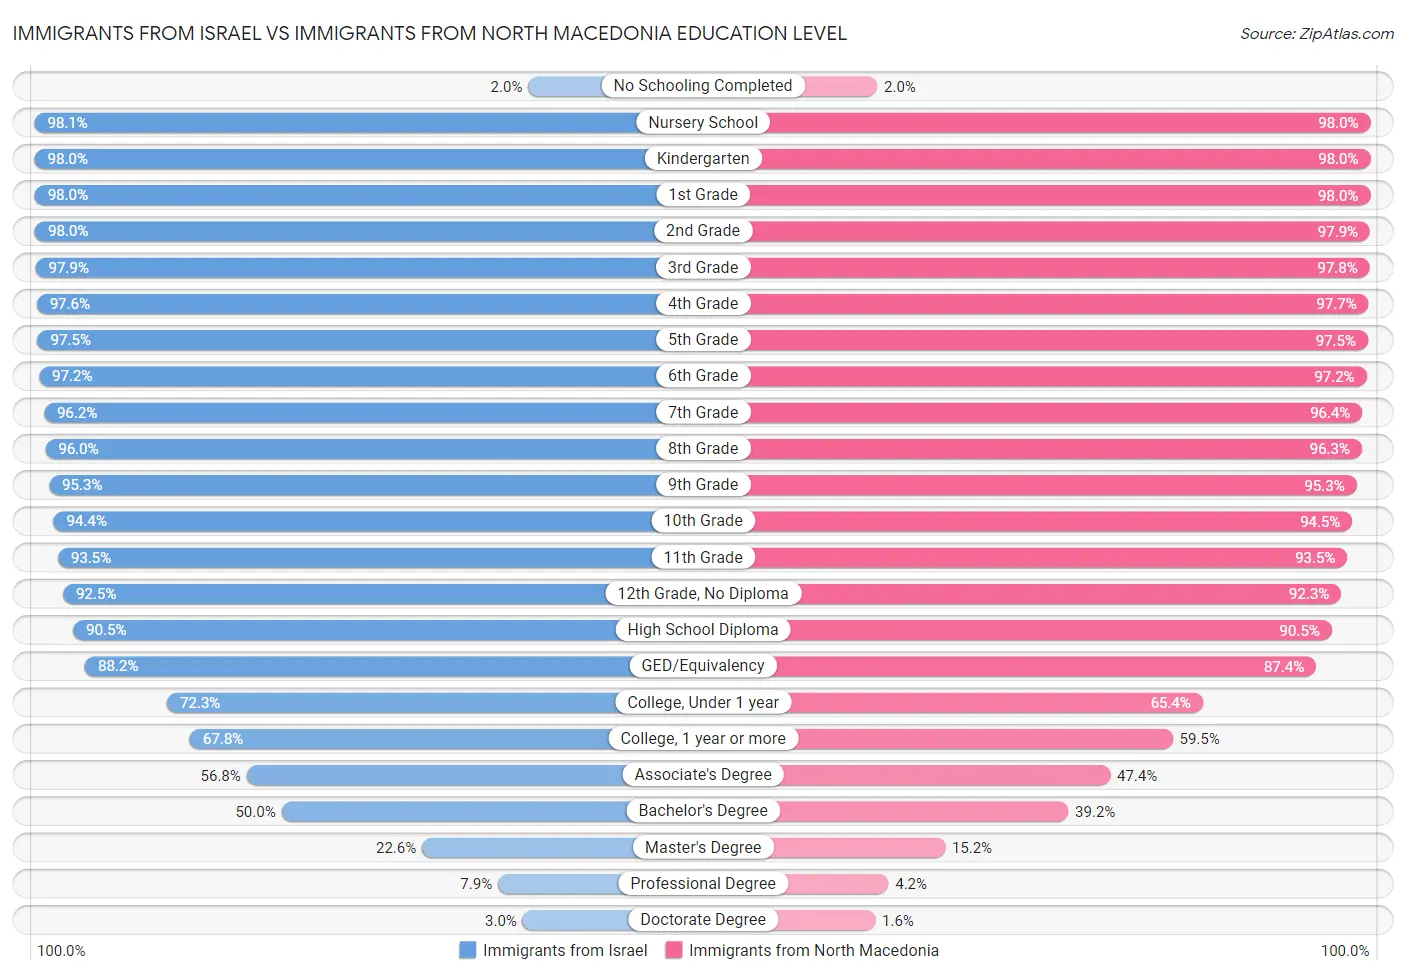 Immigrants from Israel vs Immigrants from North Macedonia Education Level